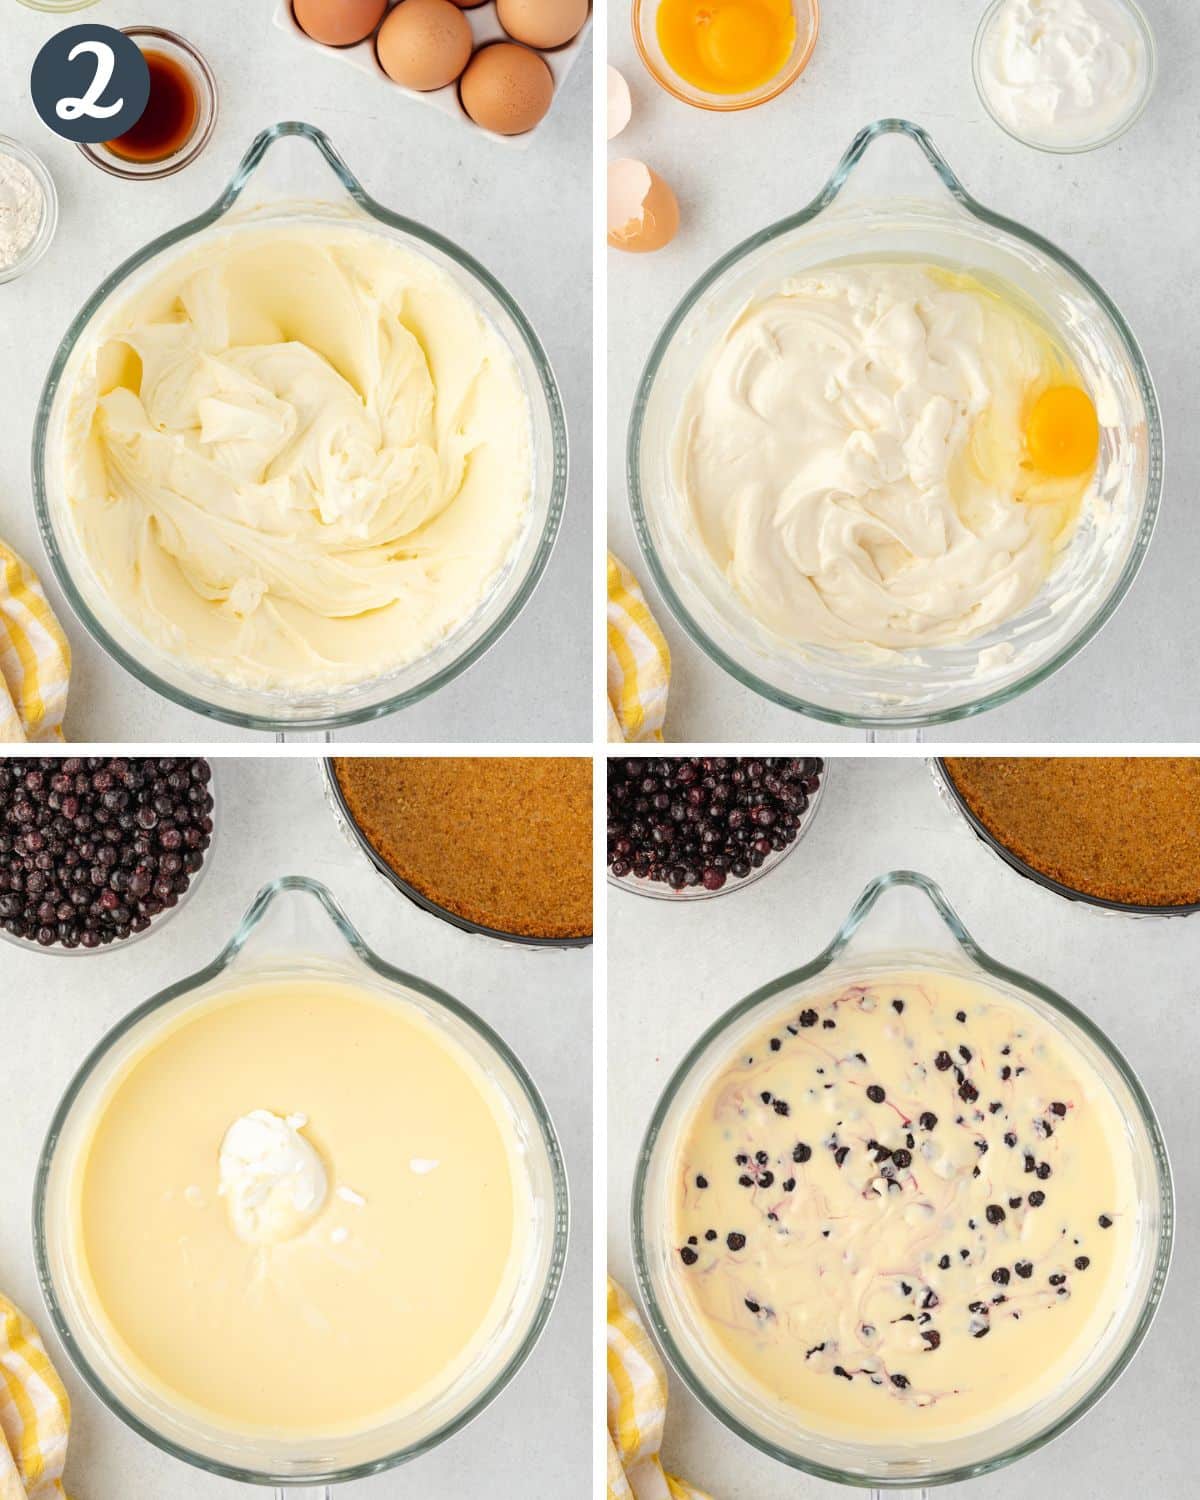 4 images showing cheesecake batter in a large bowl, with different ingredients added into the bowl.